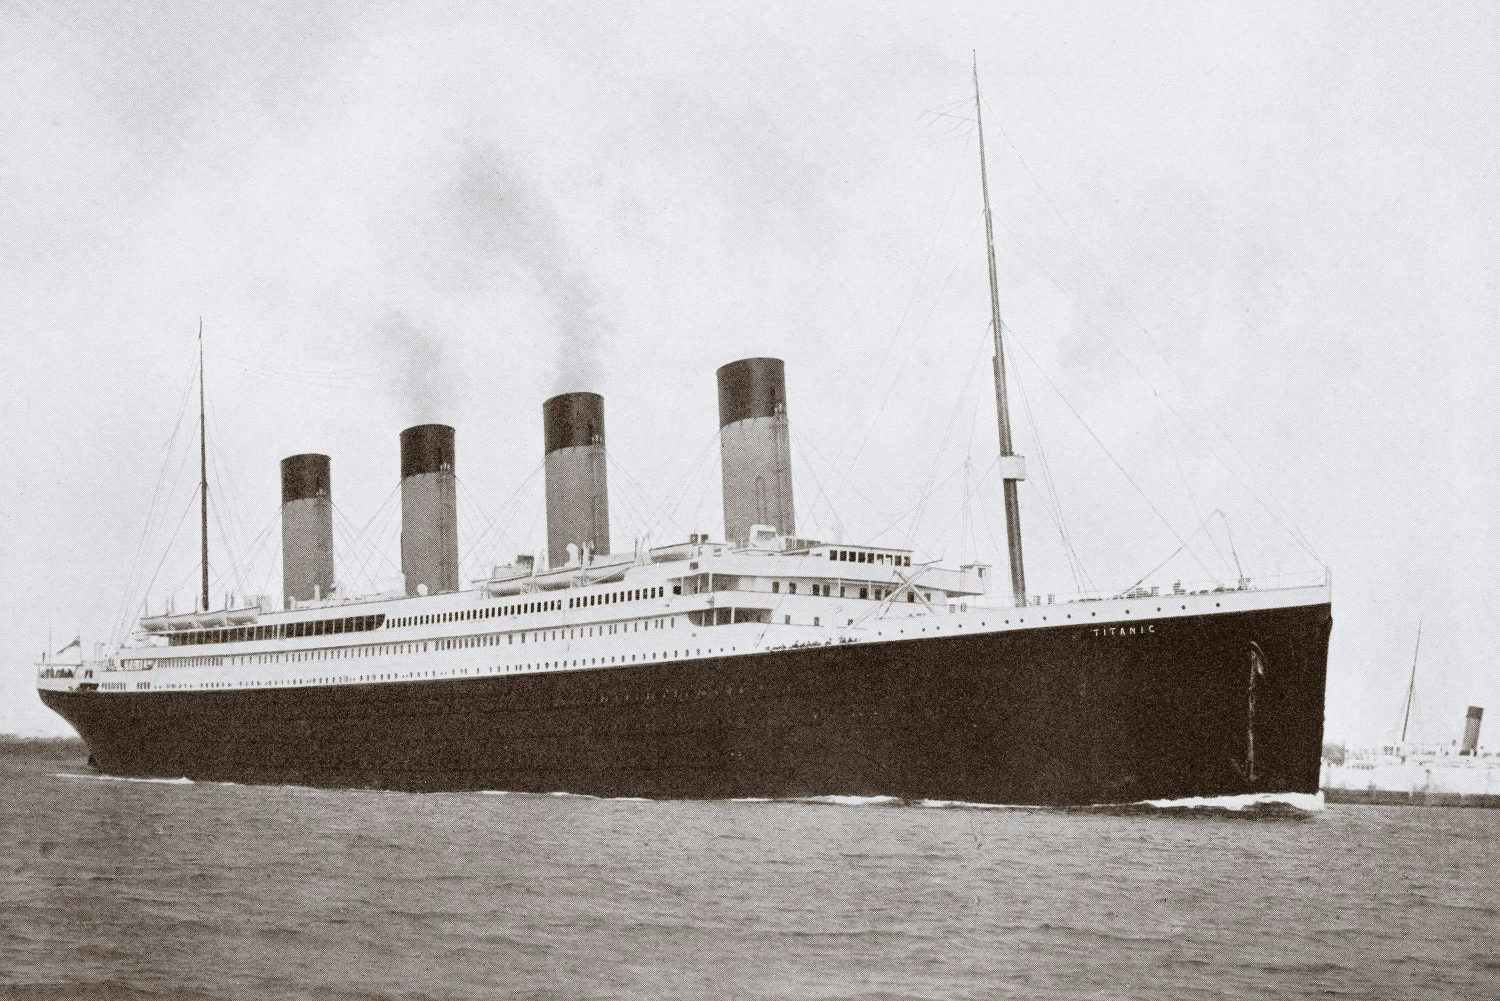 You Can Visit The Wreck Of Titanic At The Bottom Of The